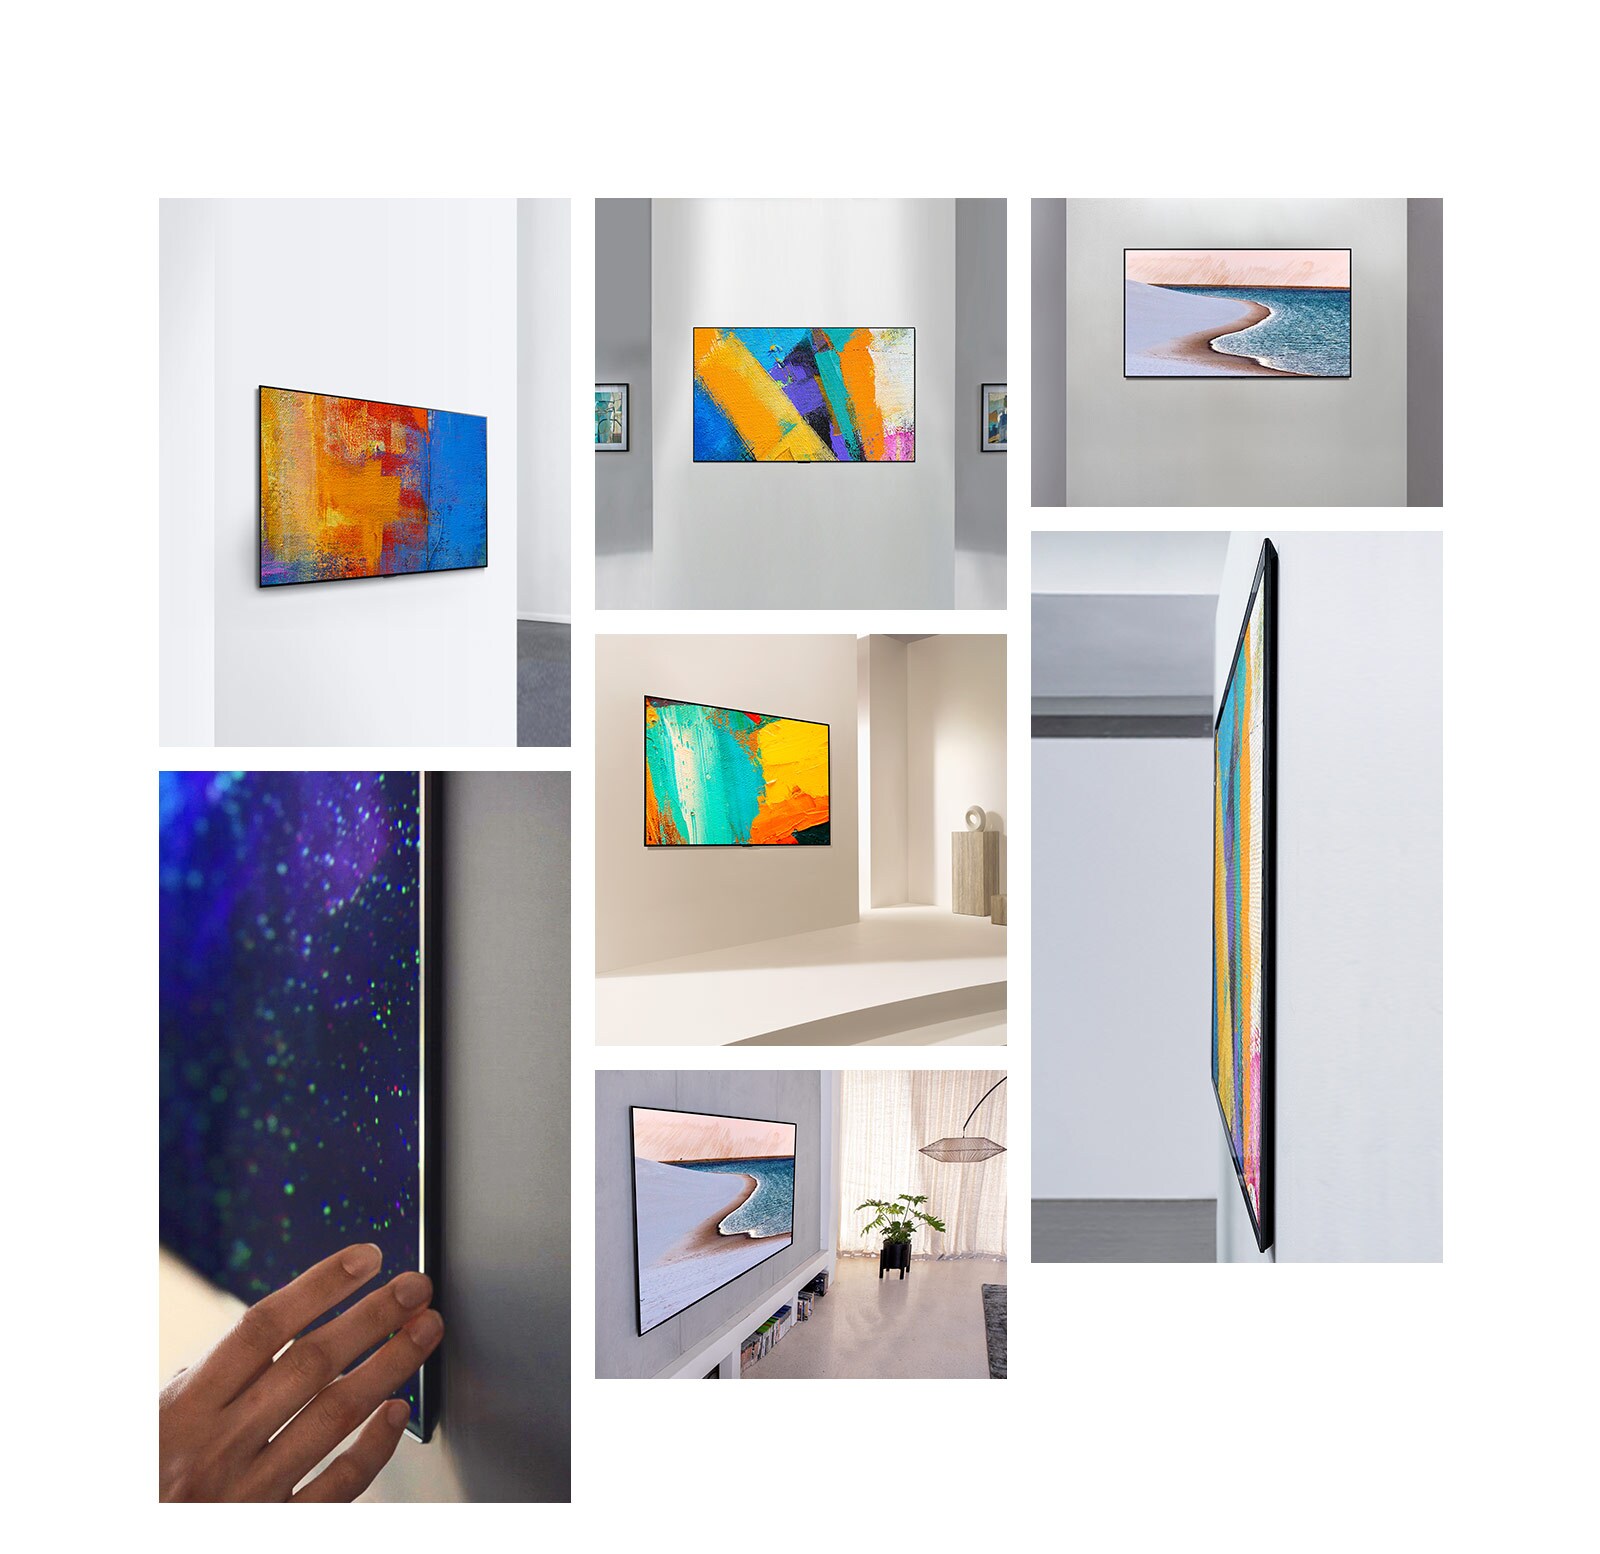 A side view of LG Gallery Design TV that aesthetically pops out from the wall, like an artwork.